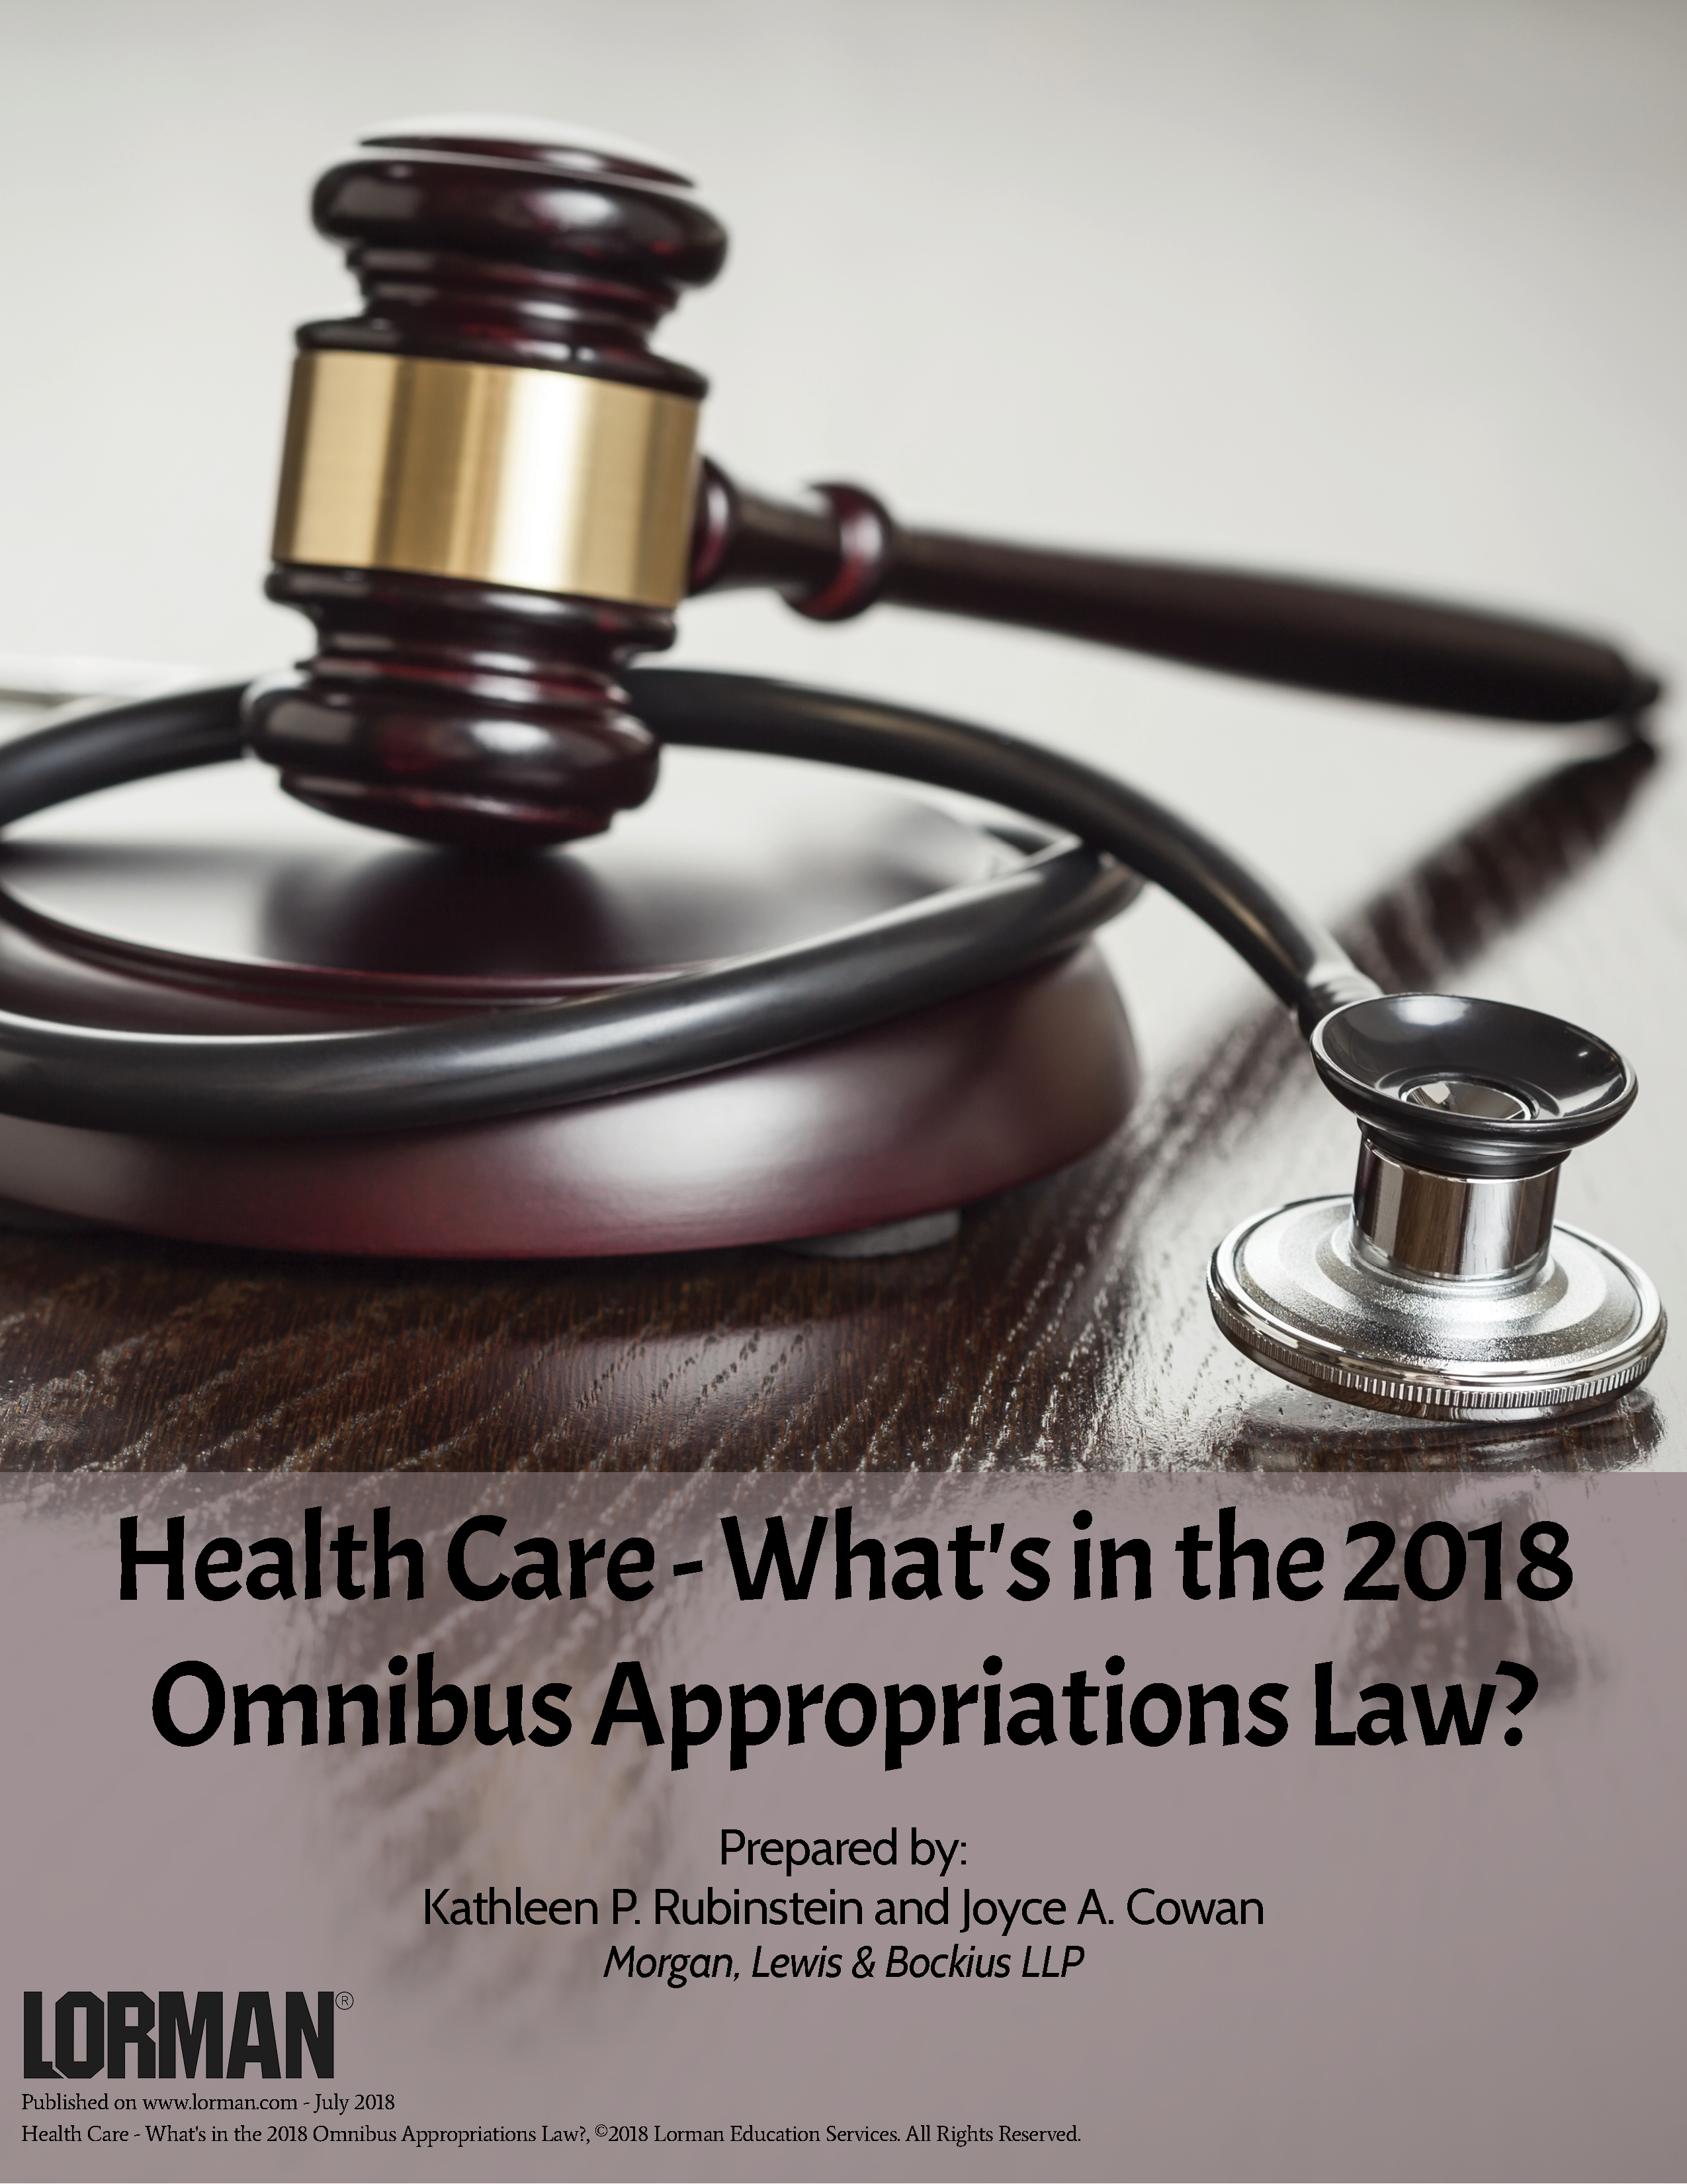 Health Care - What's in the 2018 Omnibus Appropriations Law?